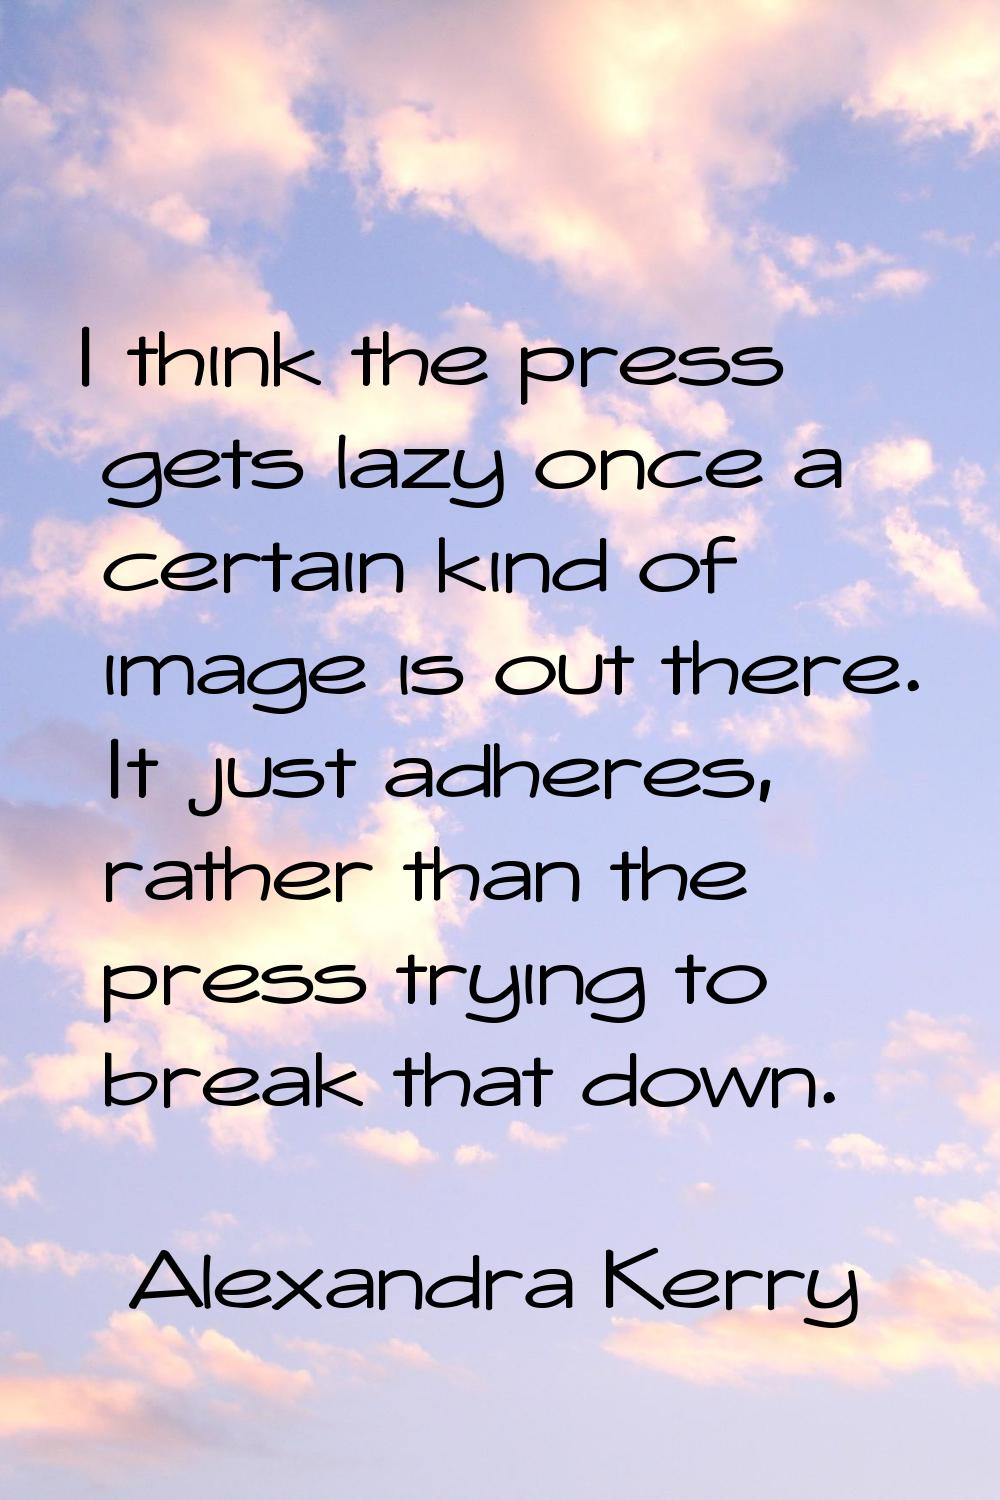 I think the press gets lazy once a certain kind of image is out there. It just adheres, rather than